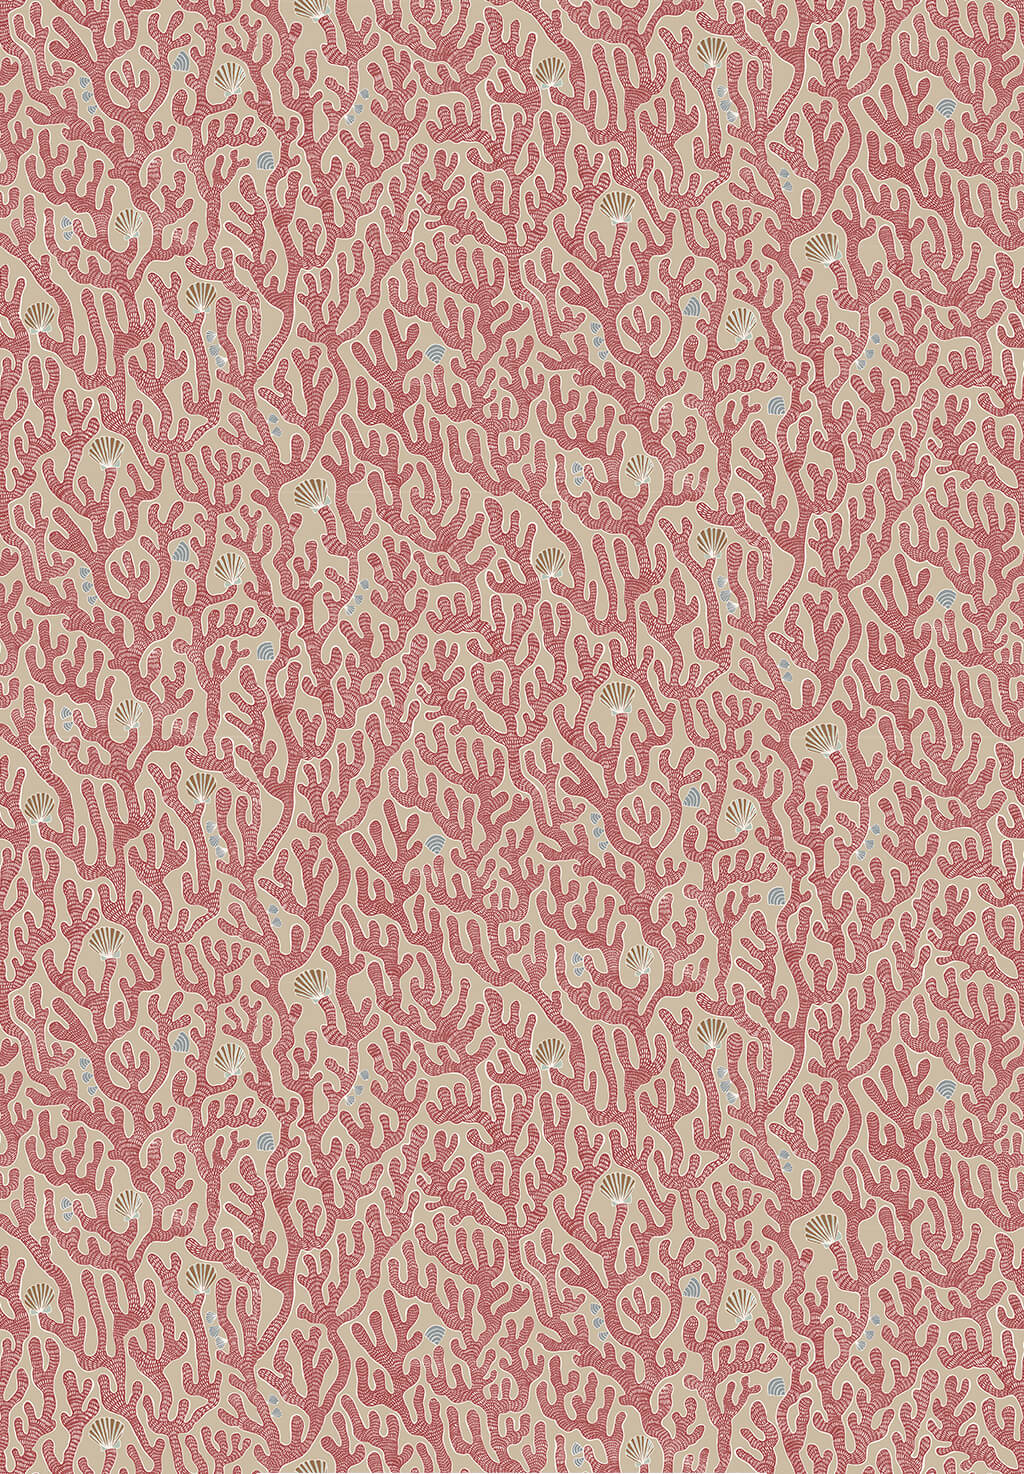 Josephine-munsey-wallpaper-coral-print-illustration-red-topping